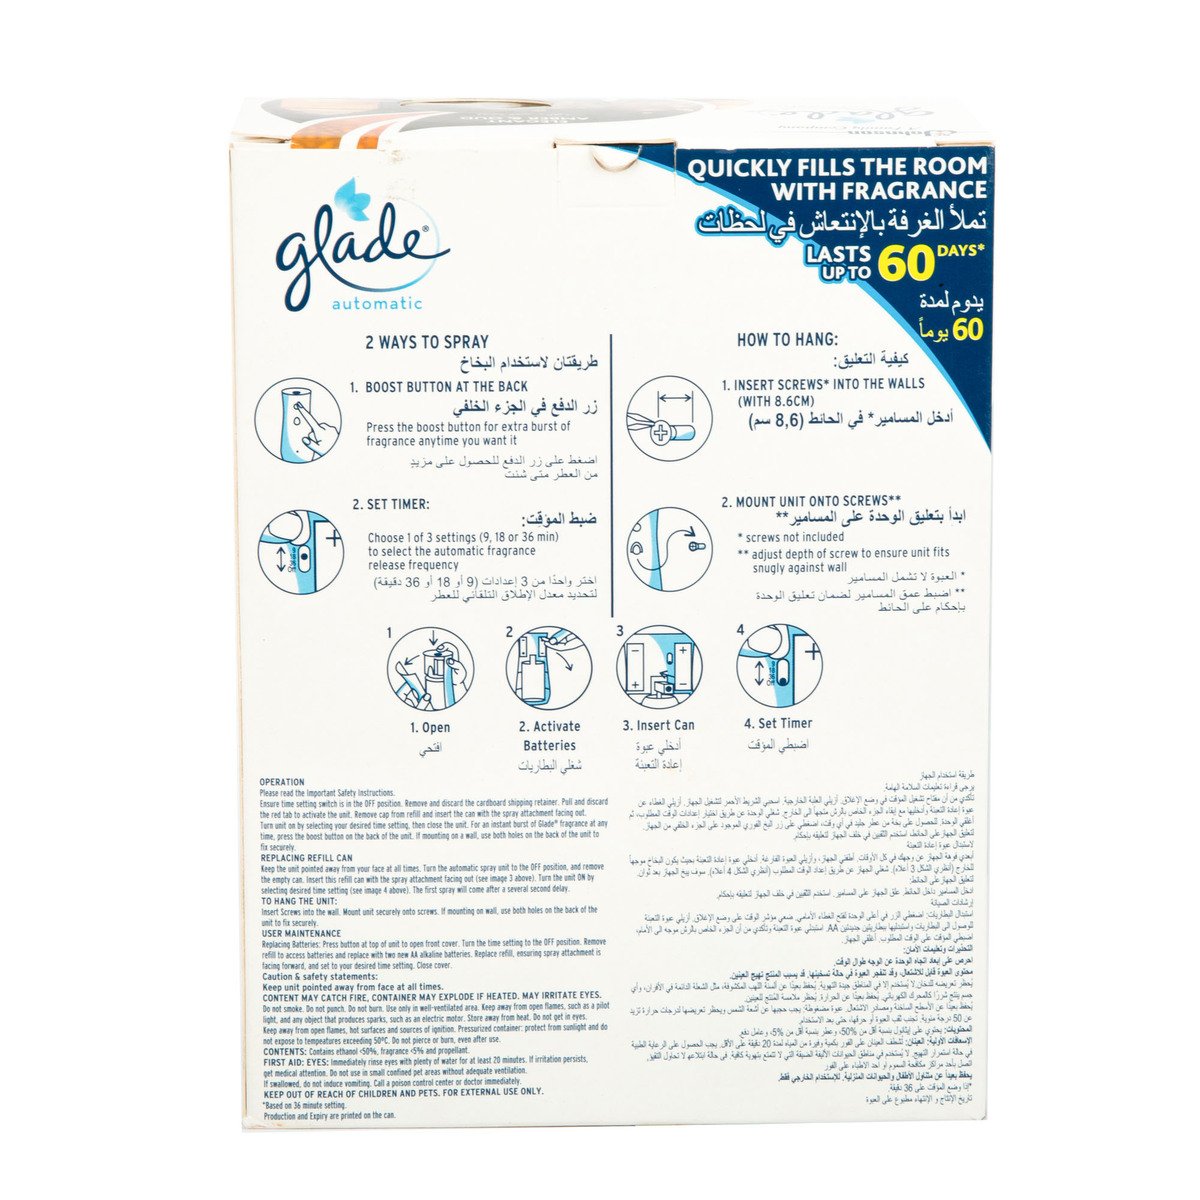 Glade 3in1 Automatic Spray Unit + Elegant Amber & Oud Refill Value Pack 175g